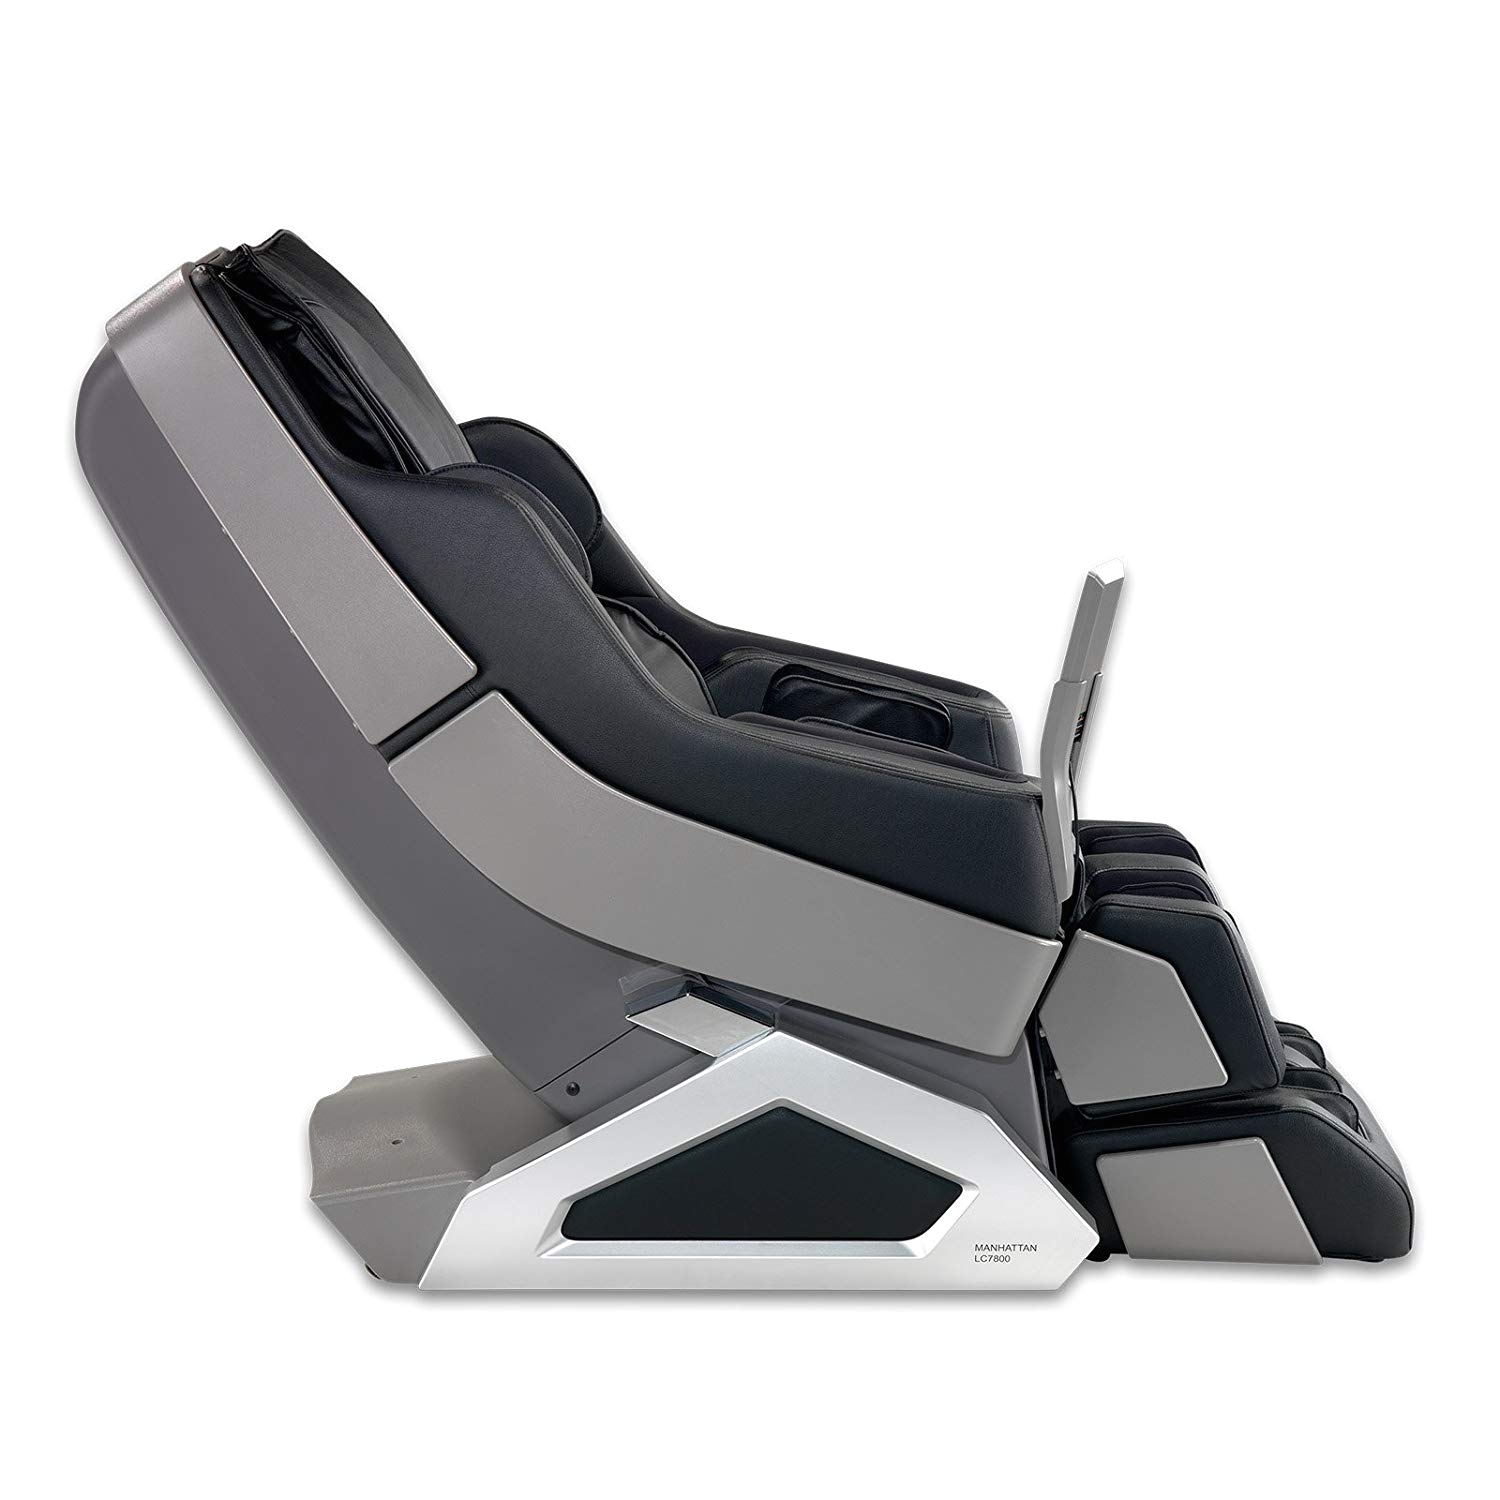 amazon com dynamic massage chair manhattan edition 2 stage zero gravity massage chair ivory with gray 243 pound health personal care